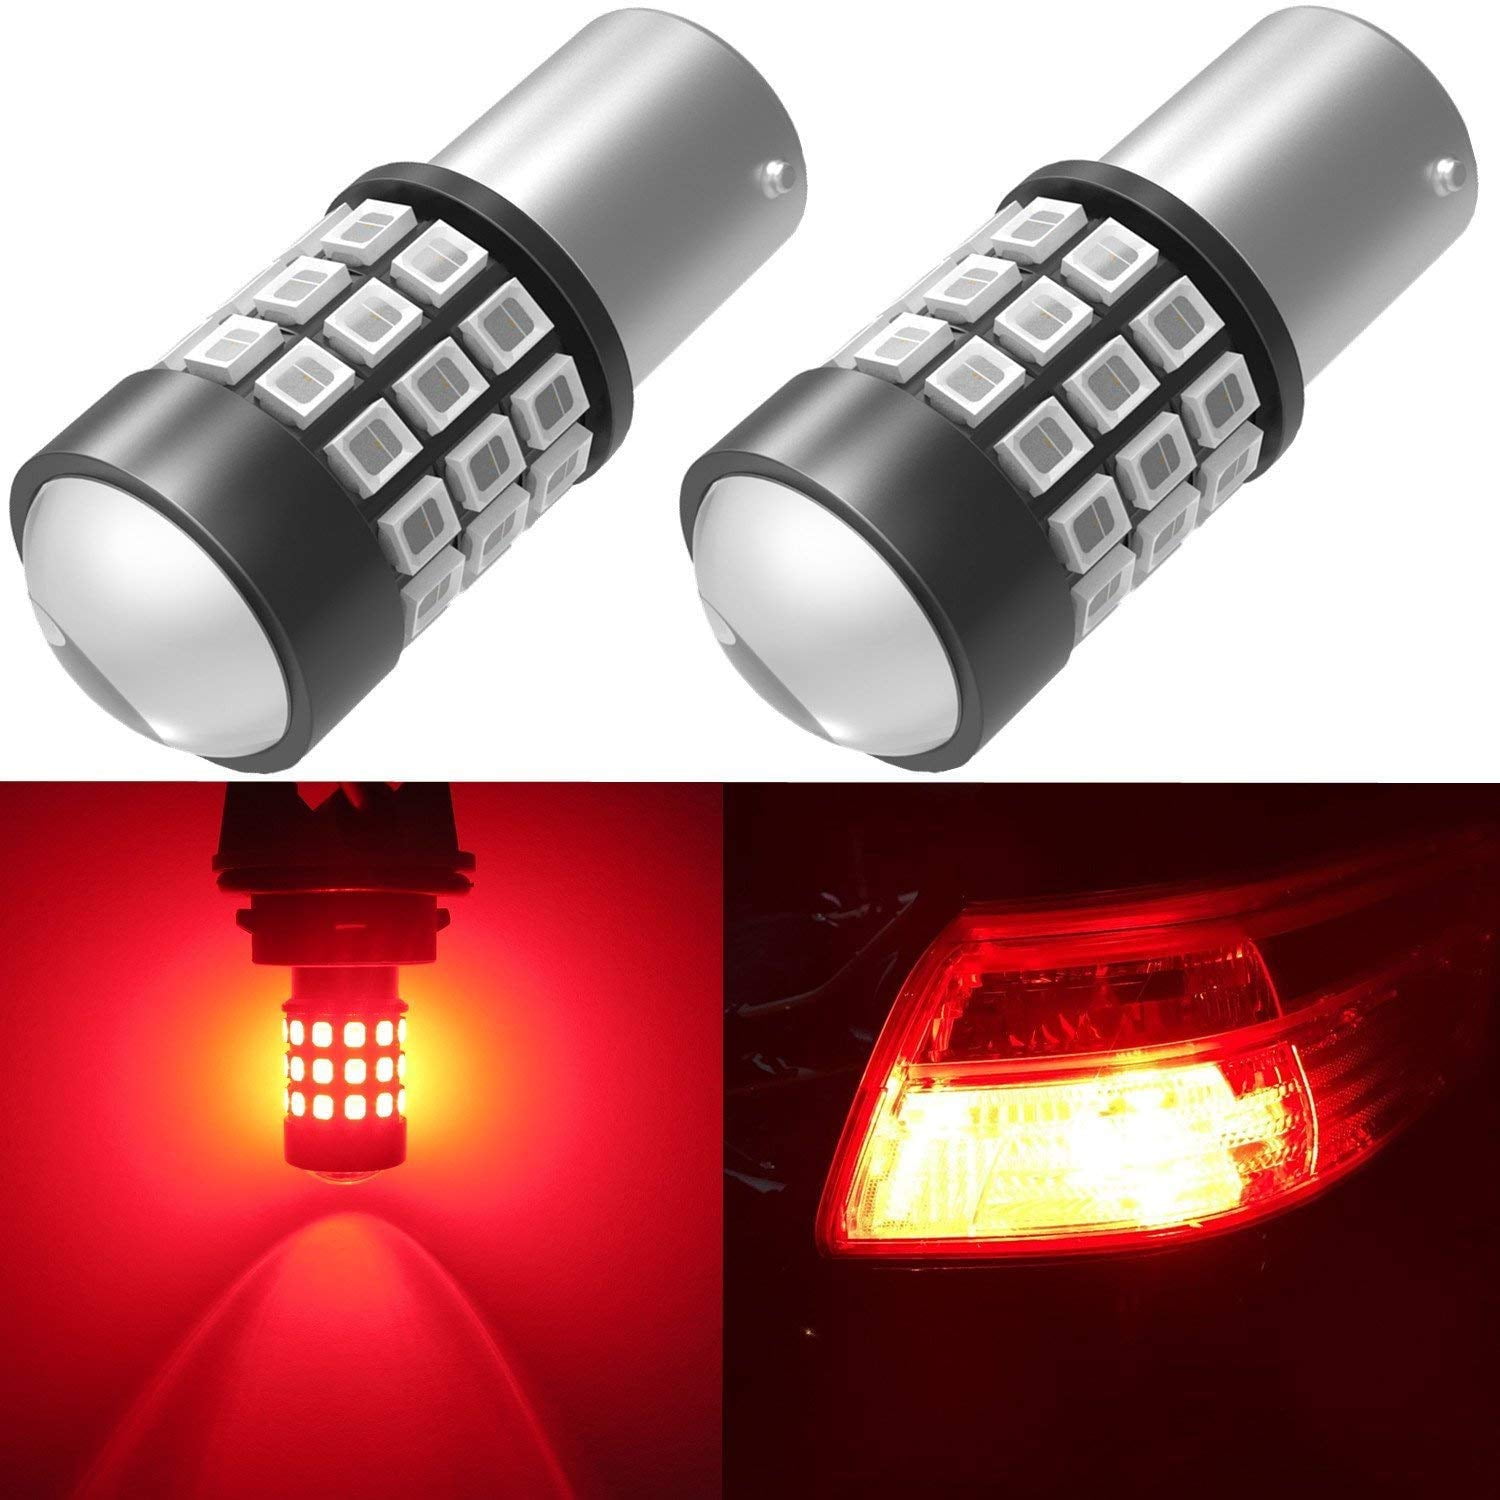 1156 Red Projector Lens LED Brake Stop Light Bulb For BMW 1 2 3 5 7 X1 X2 X3 X4